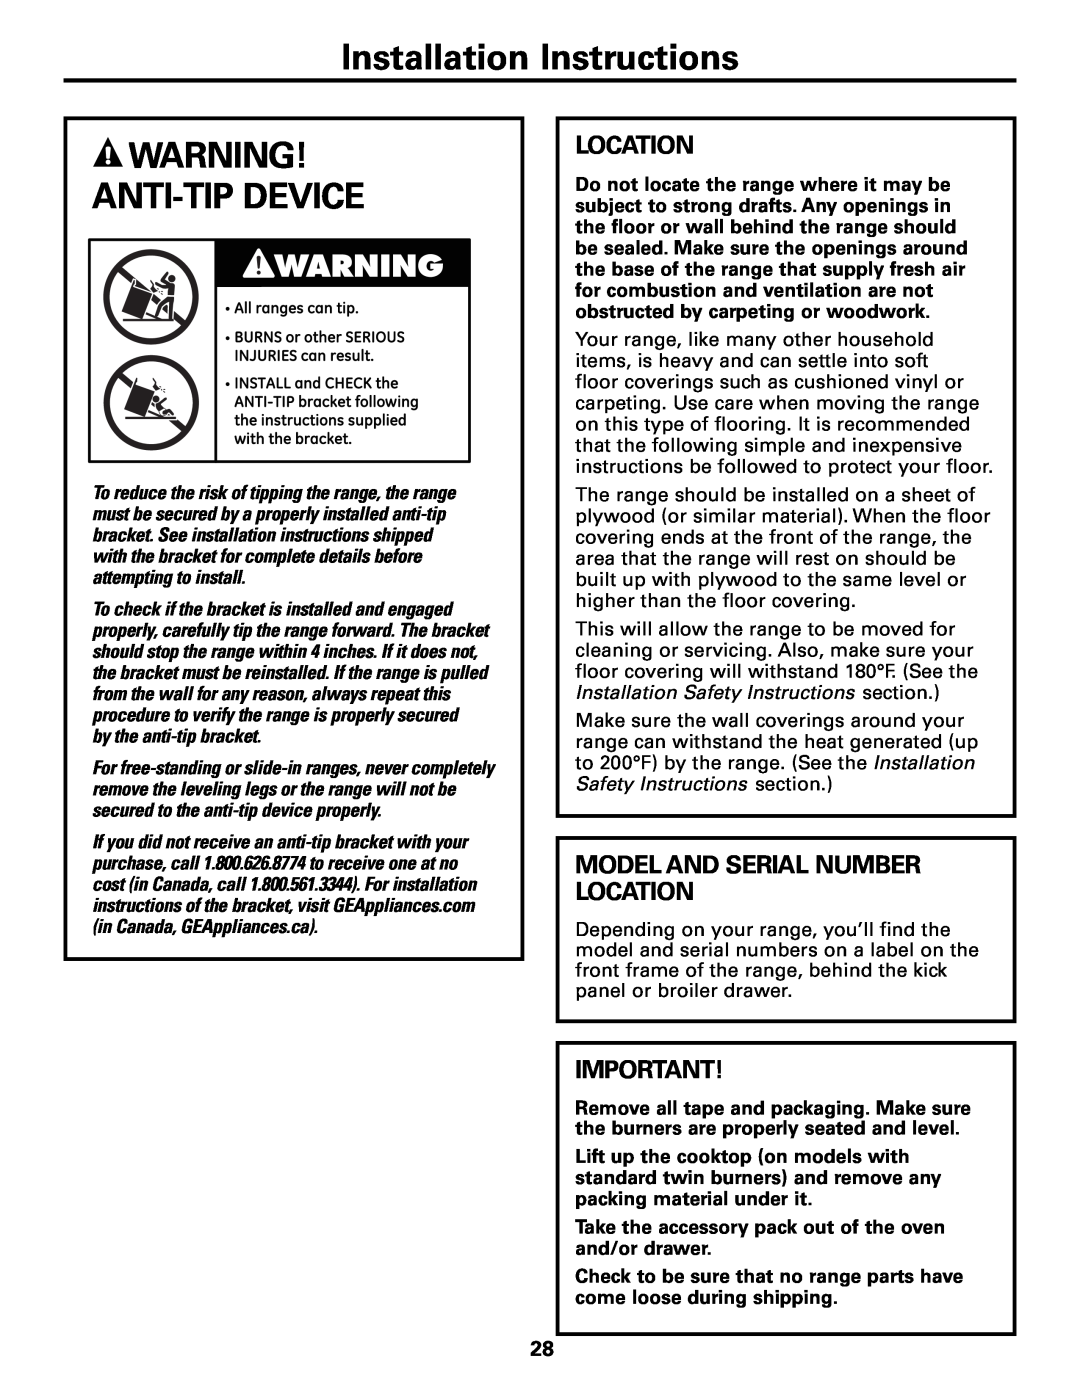 Americana Appliances AGBS300 Anti-Tipdevice, Model And Serial Number Location, Installation Instructions 